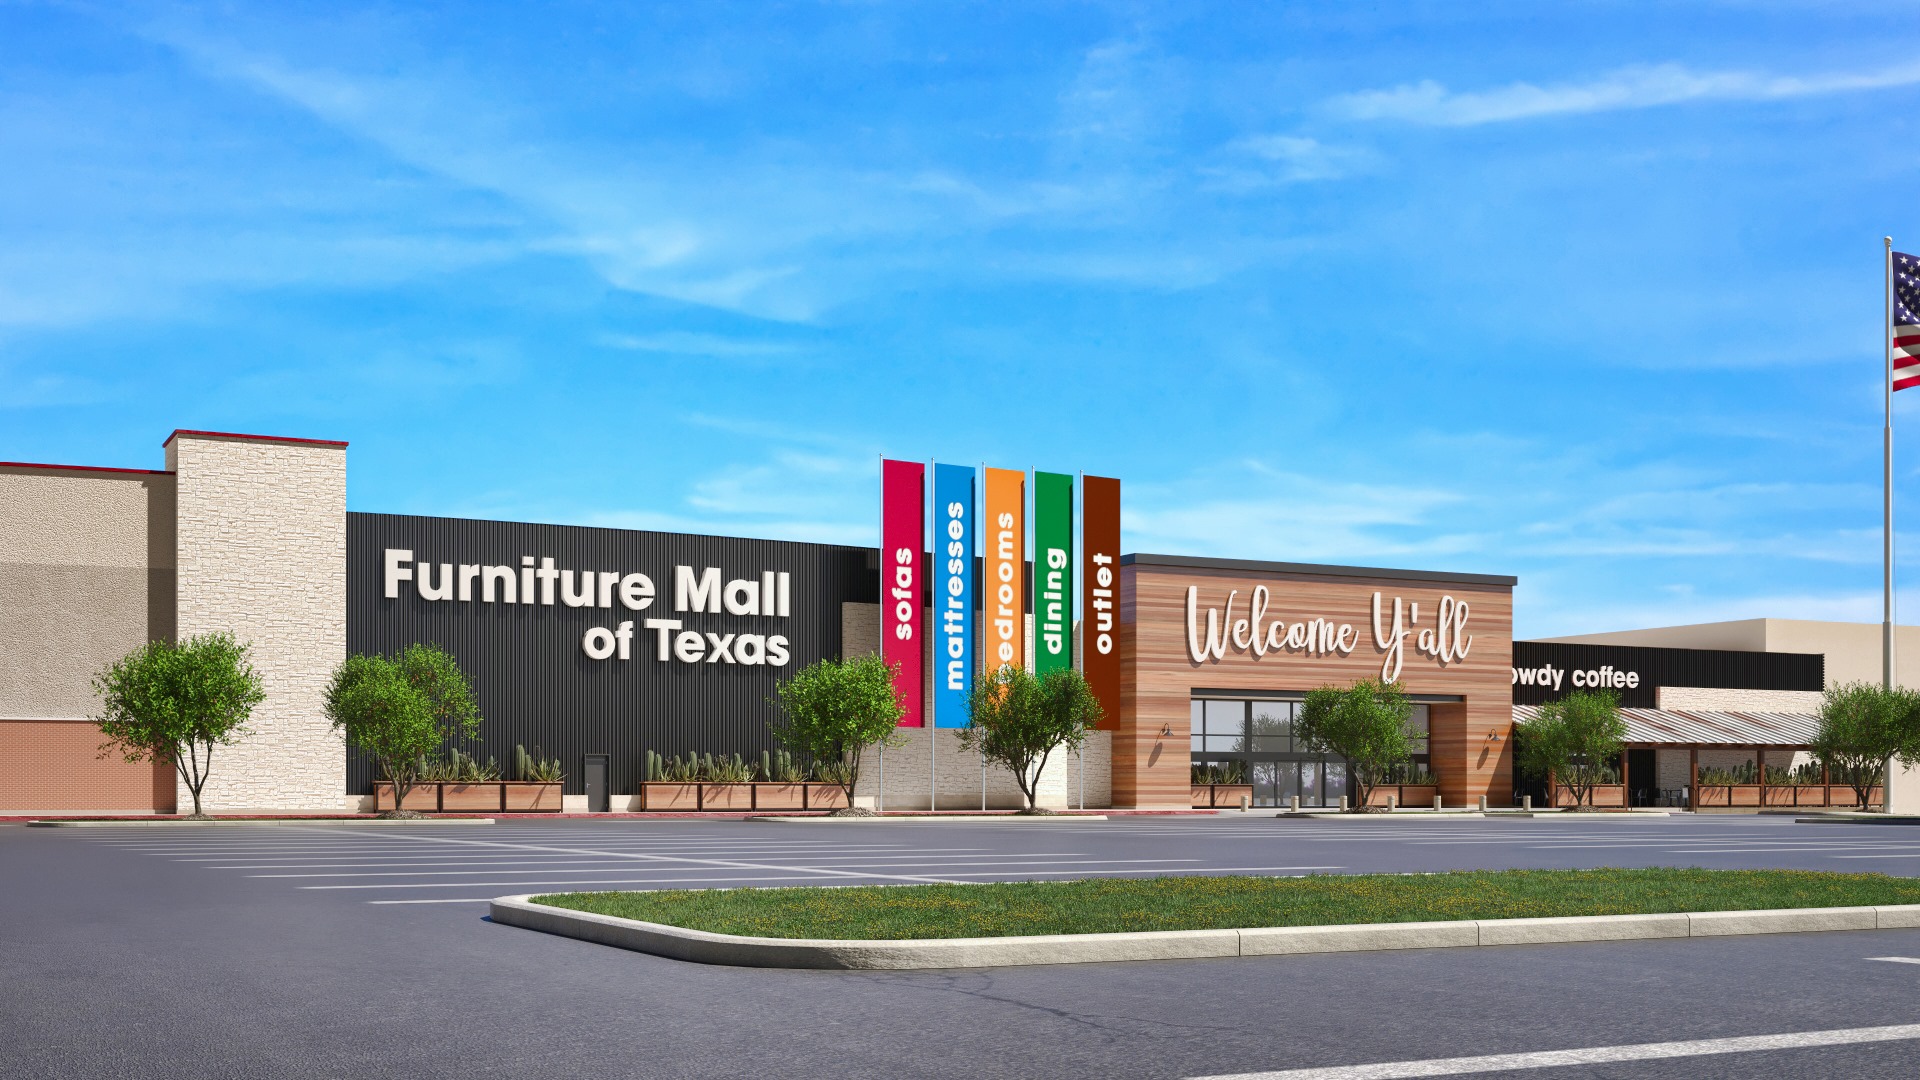 Furniture Mall of Texas - Exterior